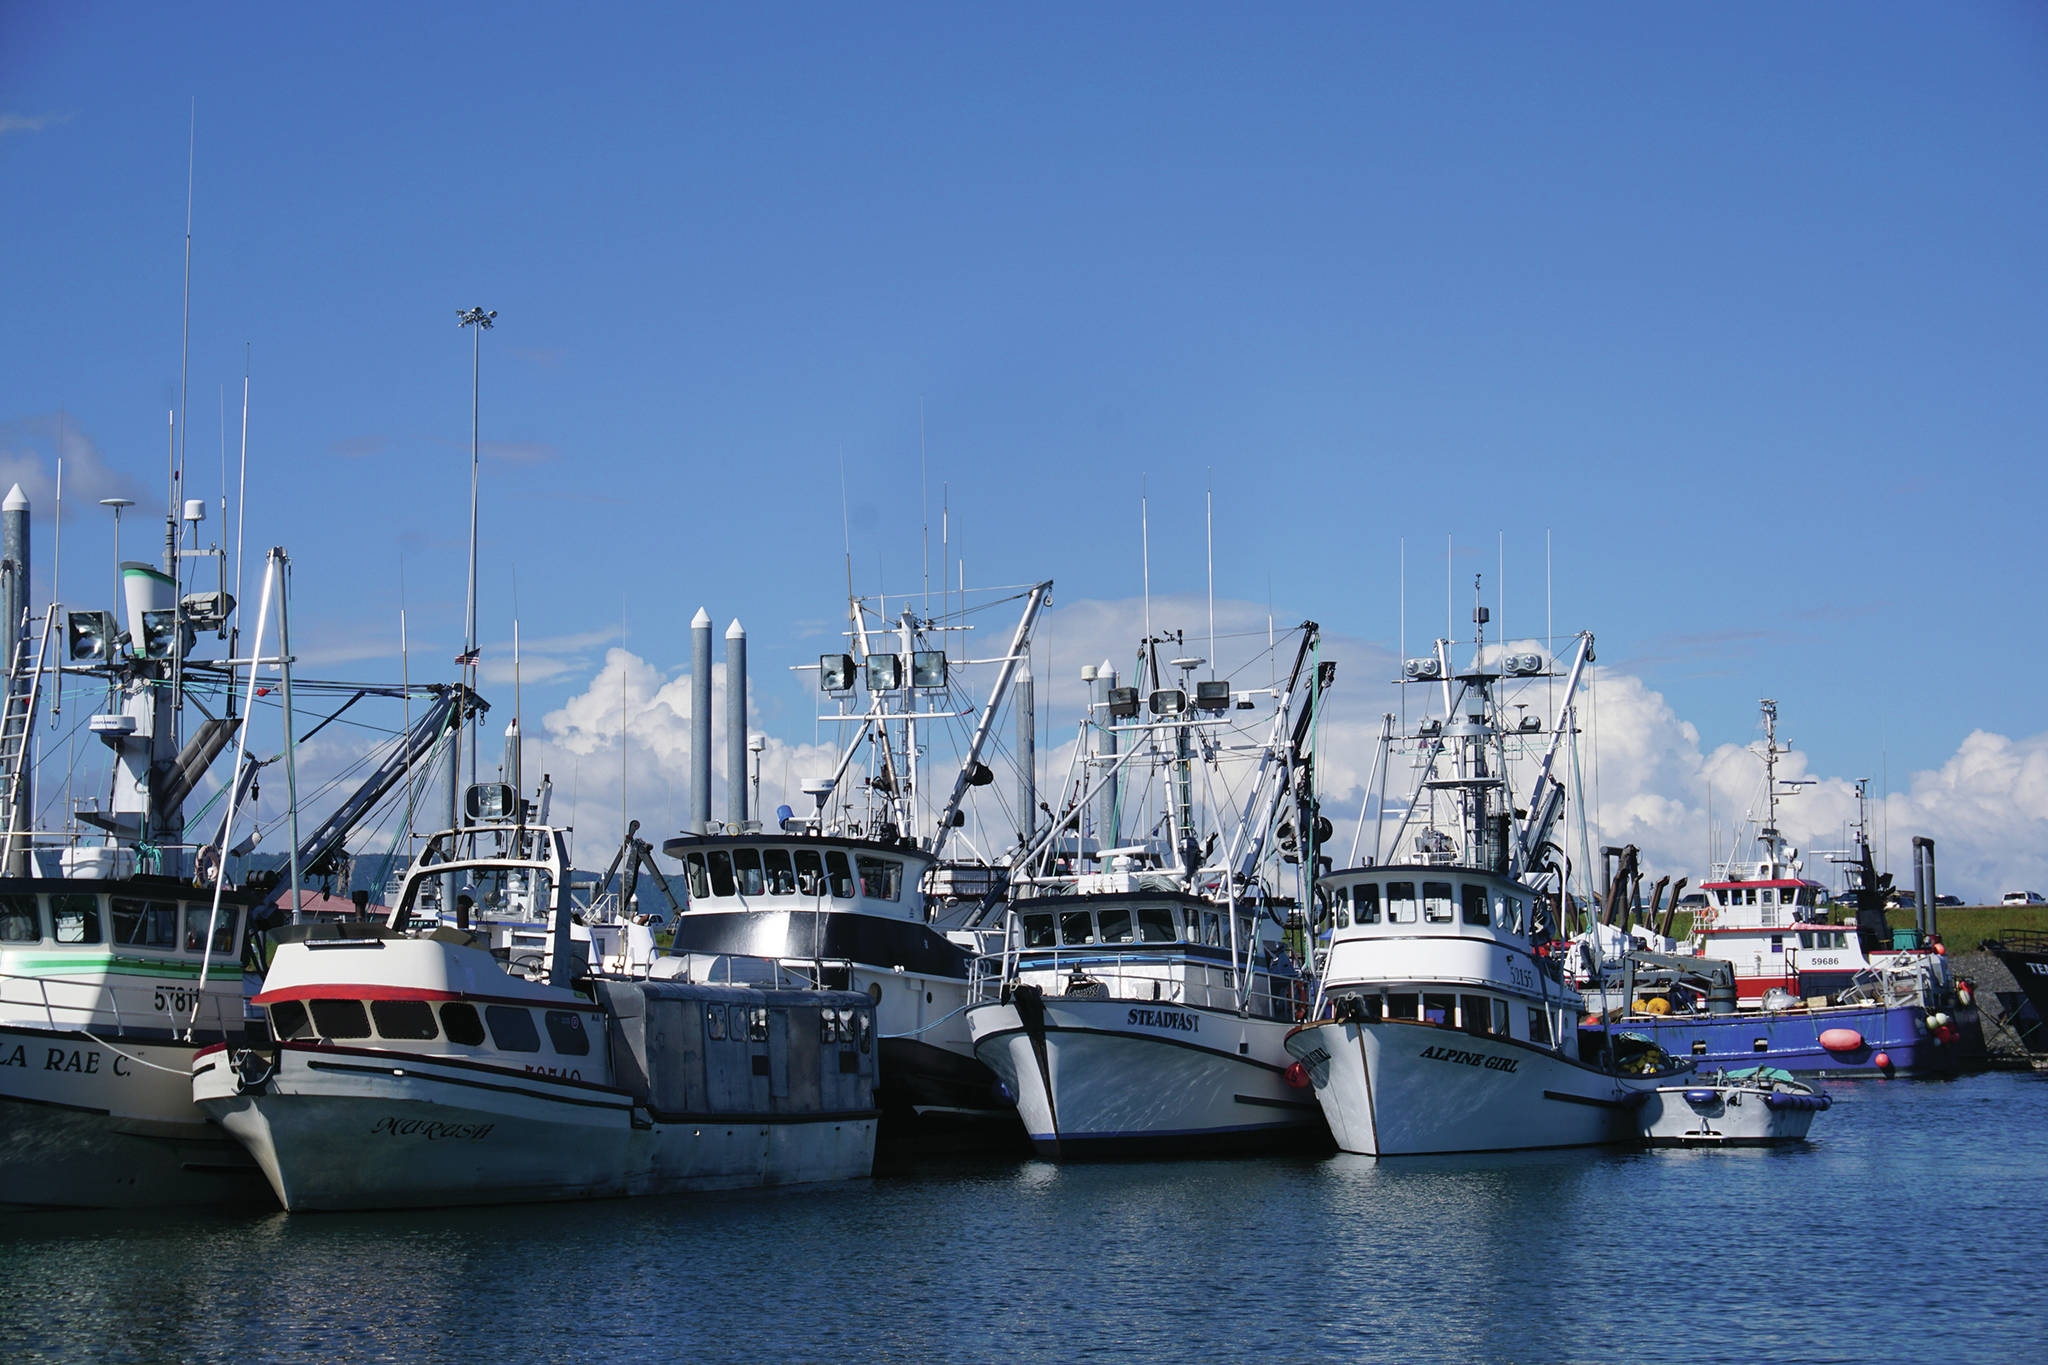 Commercial fishing boats are rafted together in May 2016 in the harbor in Homer, Alaska. (Photo by Michael Armstrong/Homer News)